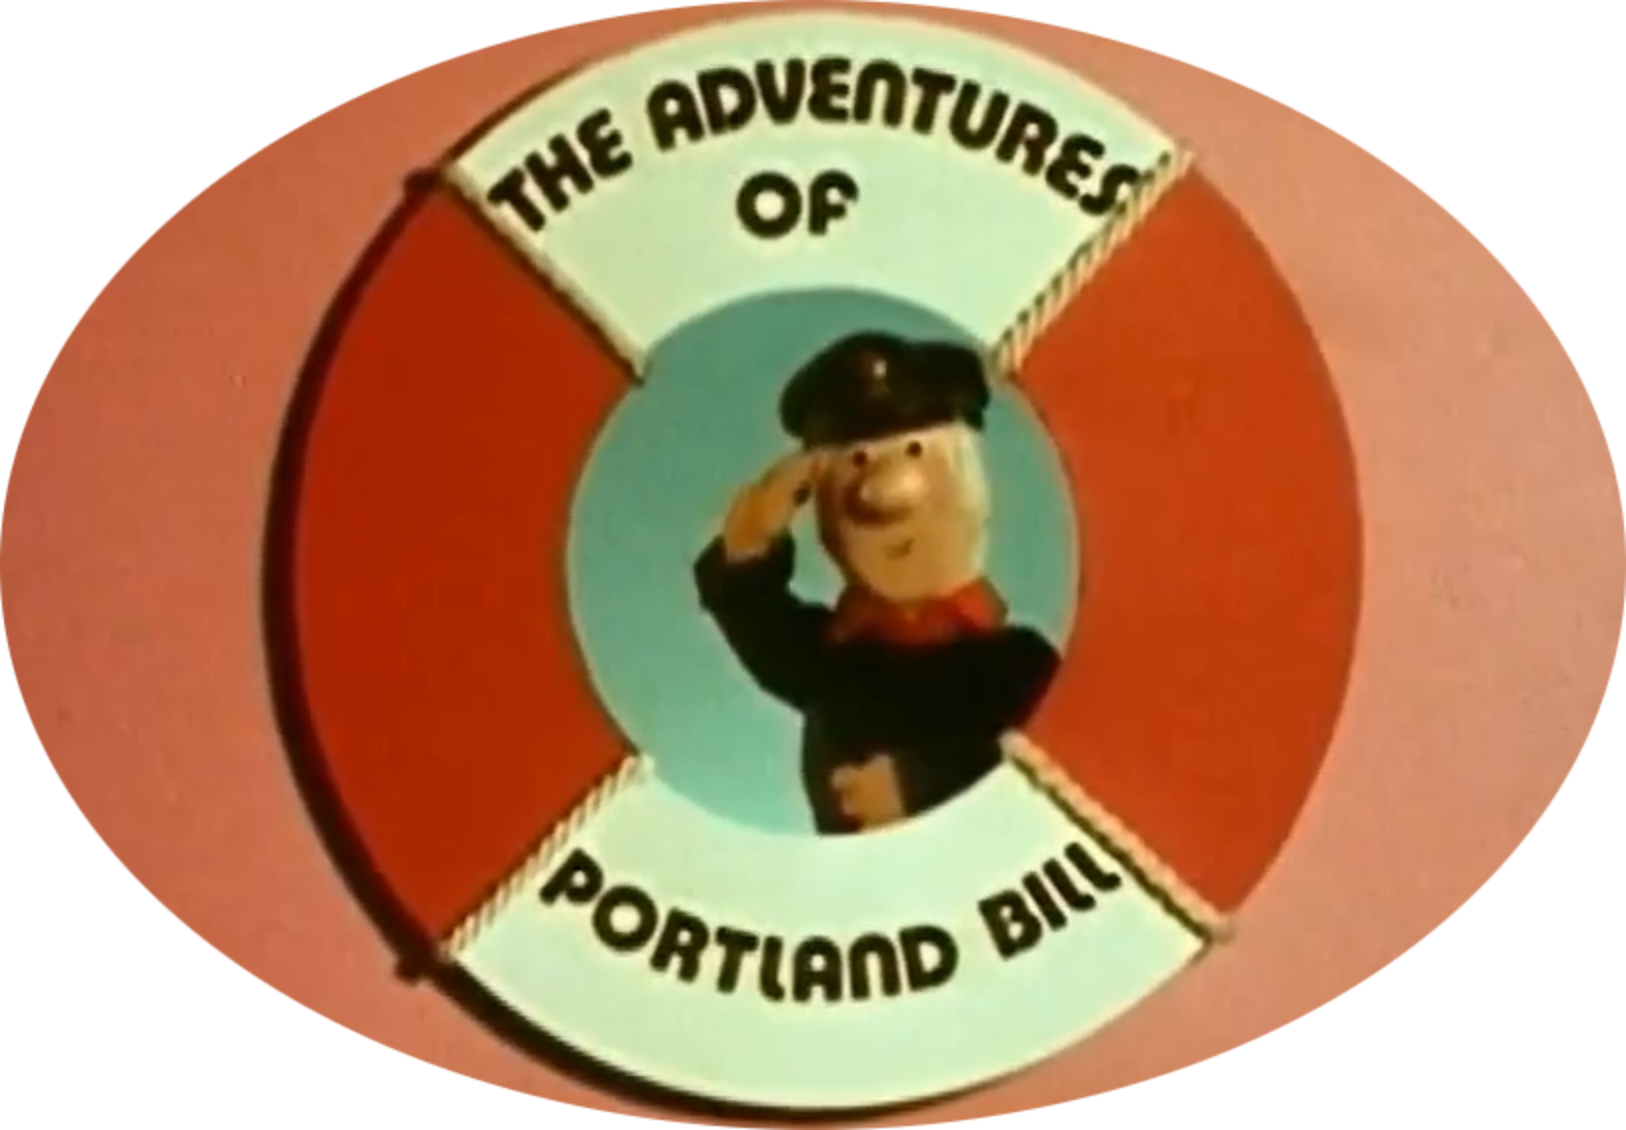 The Adventures of Portland Bill Complete (3 DVDs Box Set)